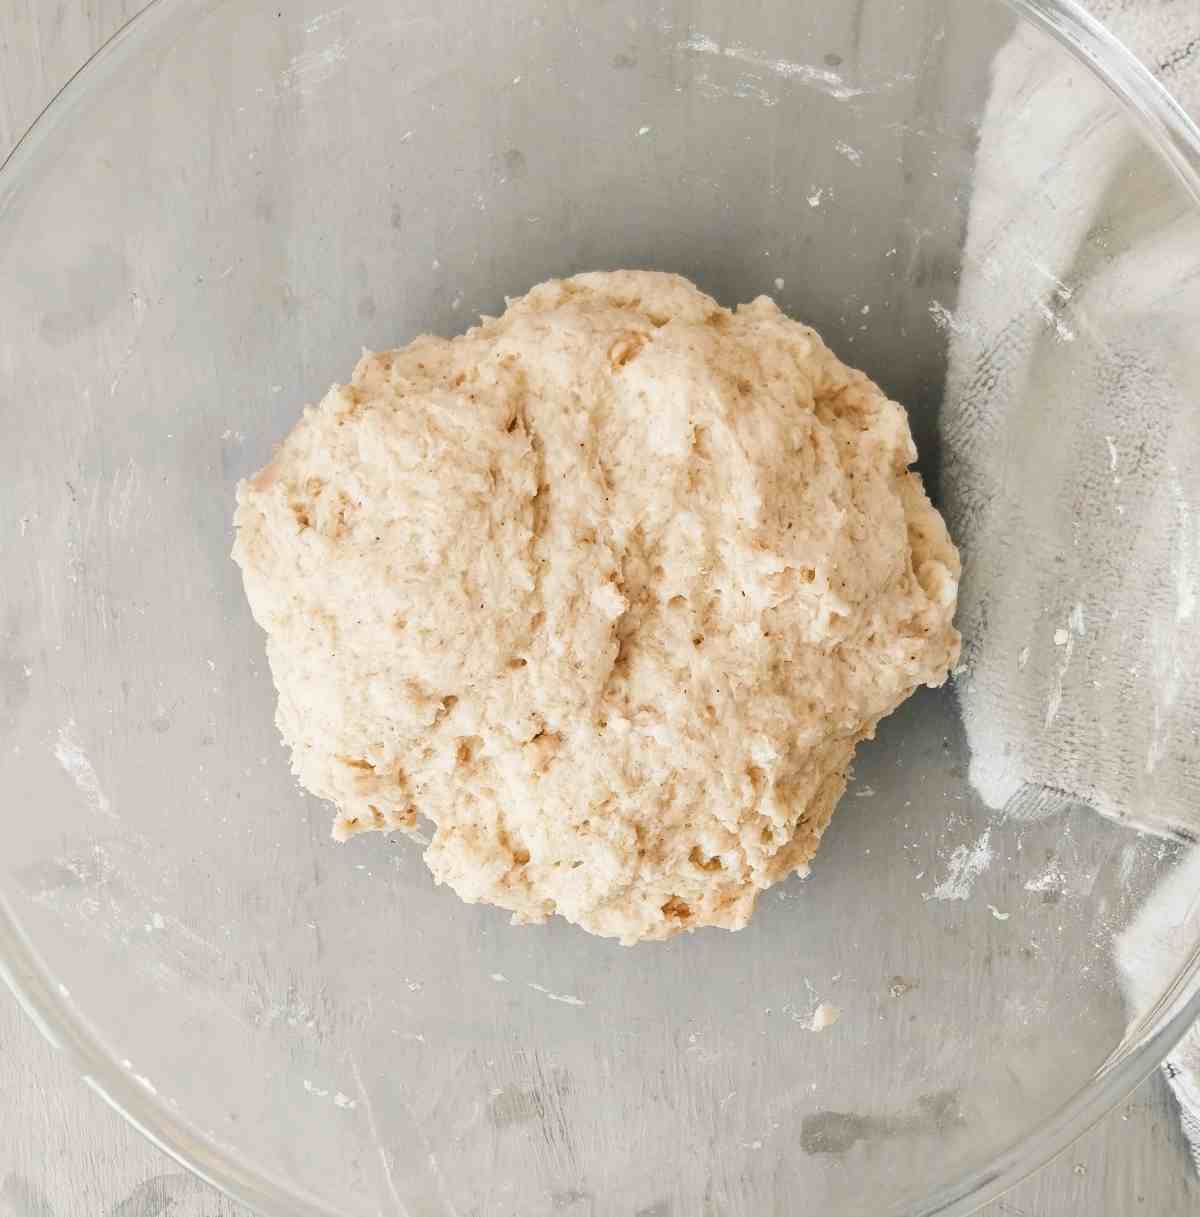 Lebanese bread dough that rose in a glass mixing bowl.